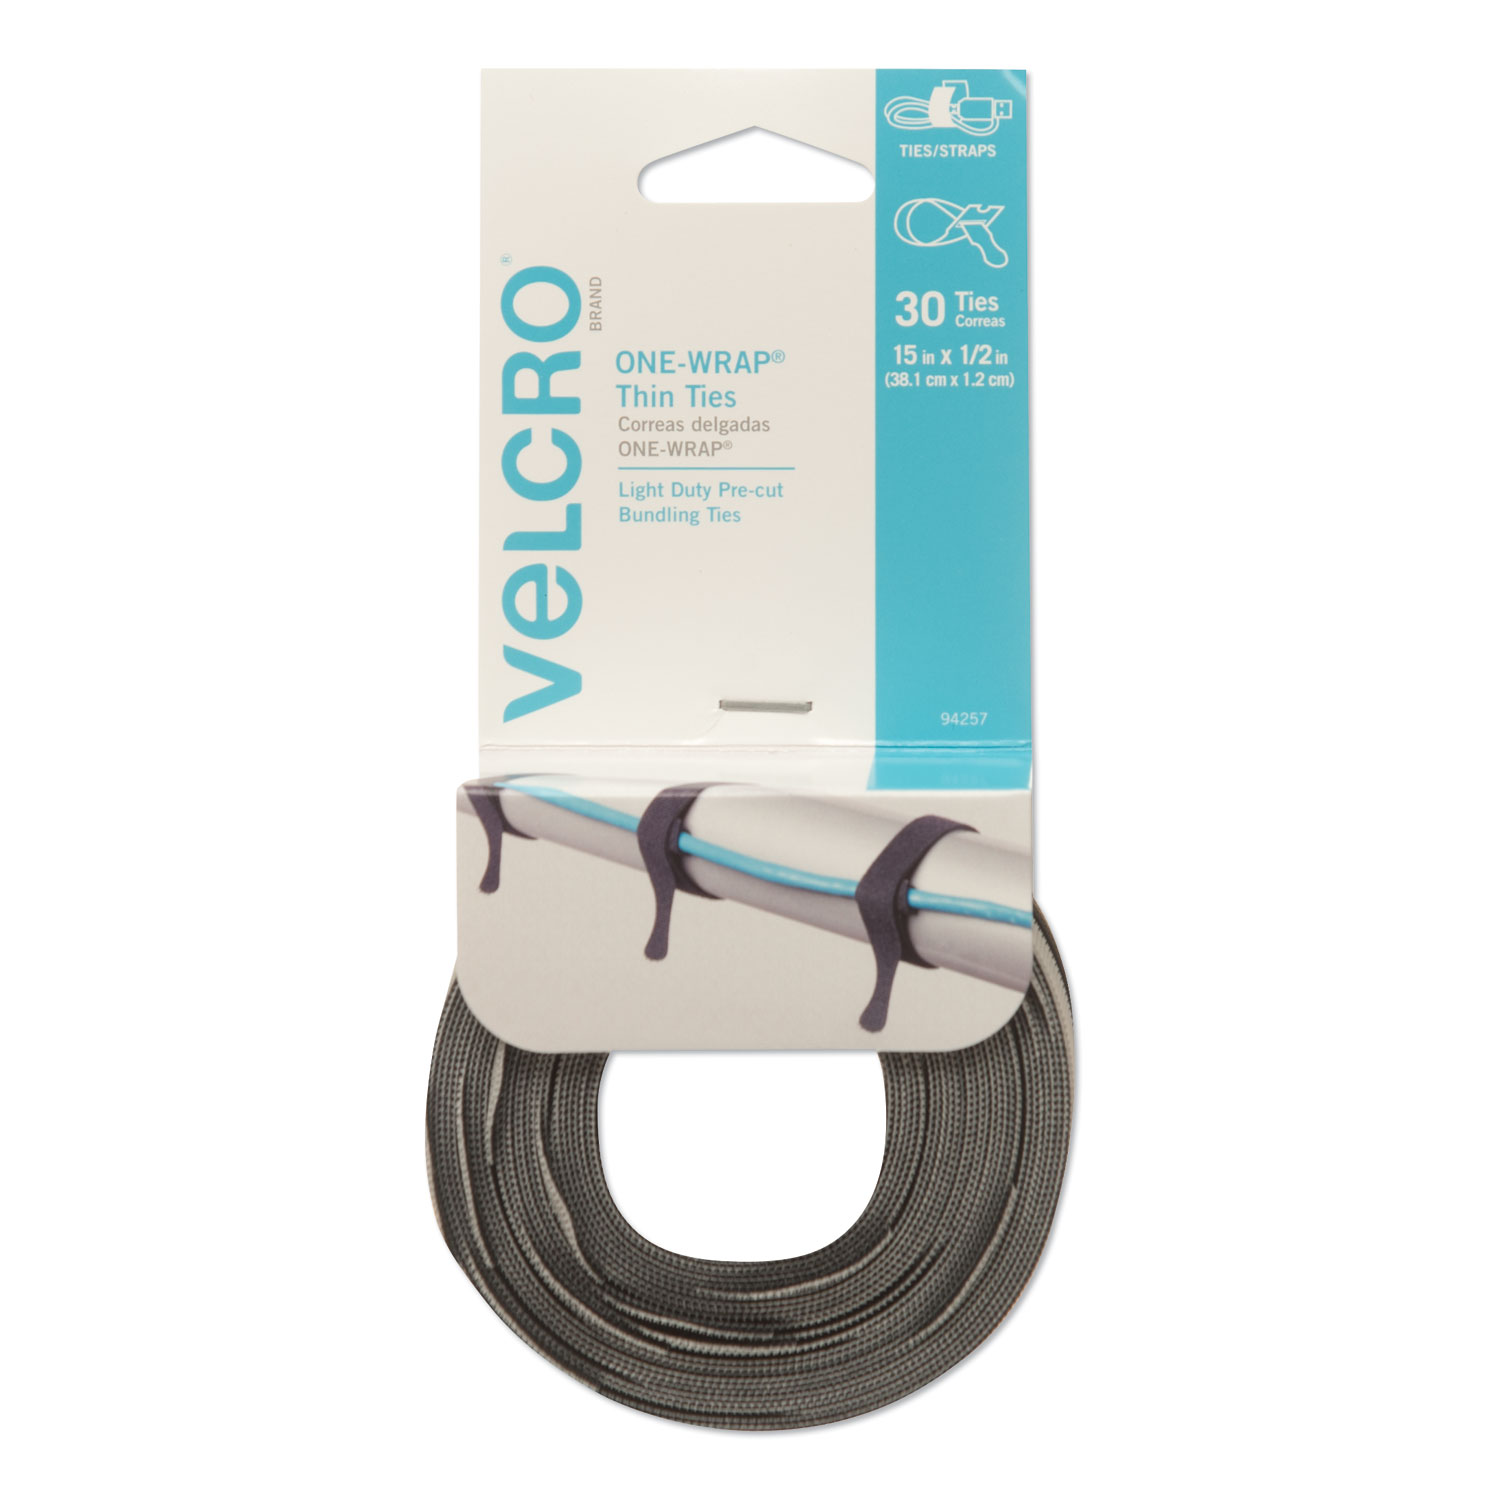 VELCRO Brand ONE-WRAP Double Sided Roll | 45 Ft x 1-1/2 In | Cut to Length  Straps Heavy Duty | Bundling Ties Fasten to Themselves for Secure Hold